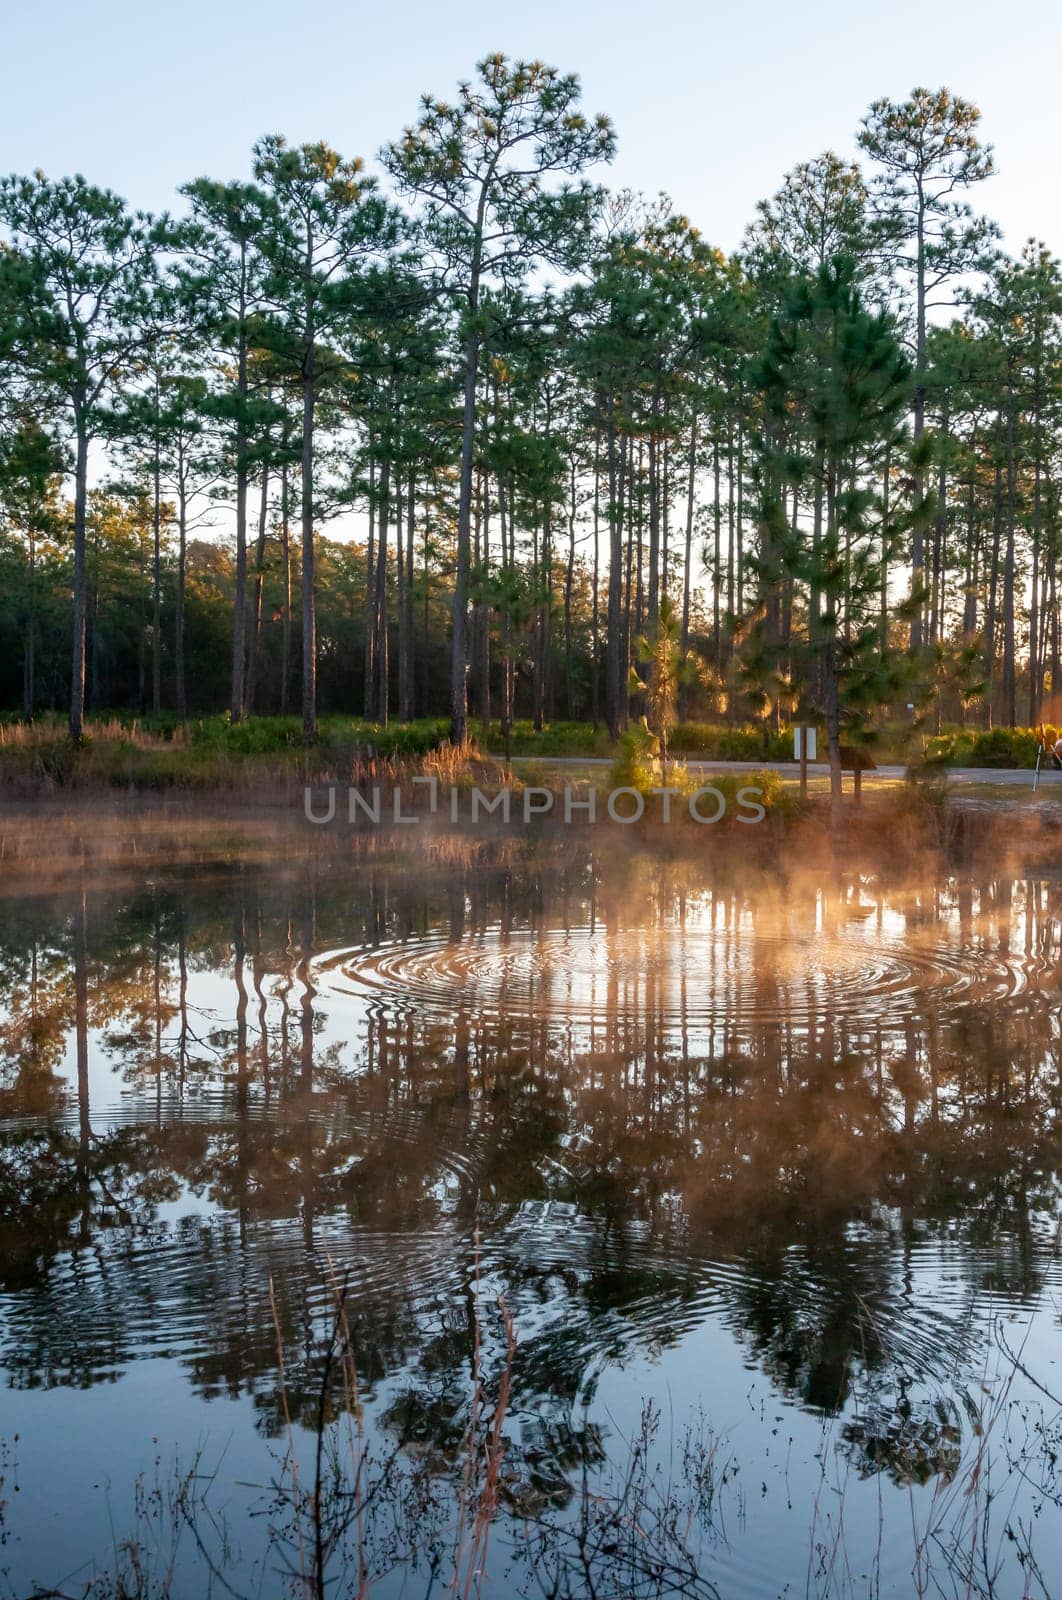 Reflection of trees in the lake water in the evening at sunset, Louisiana, USA